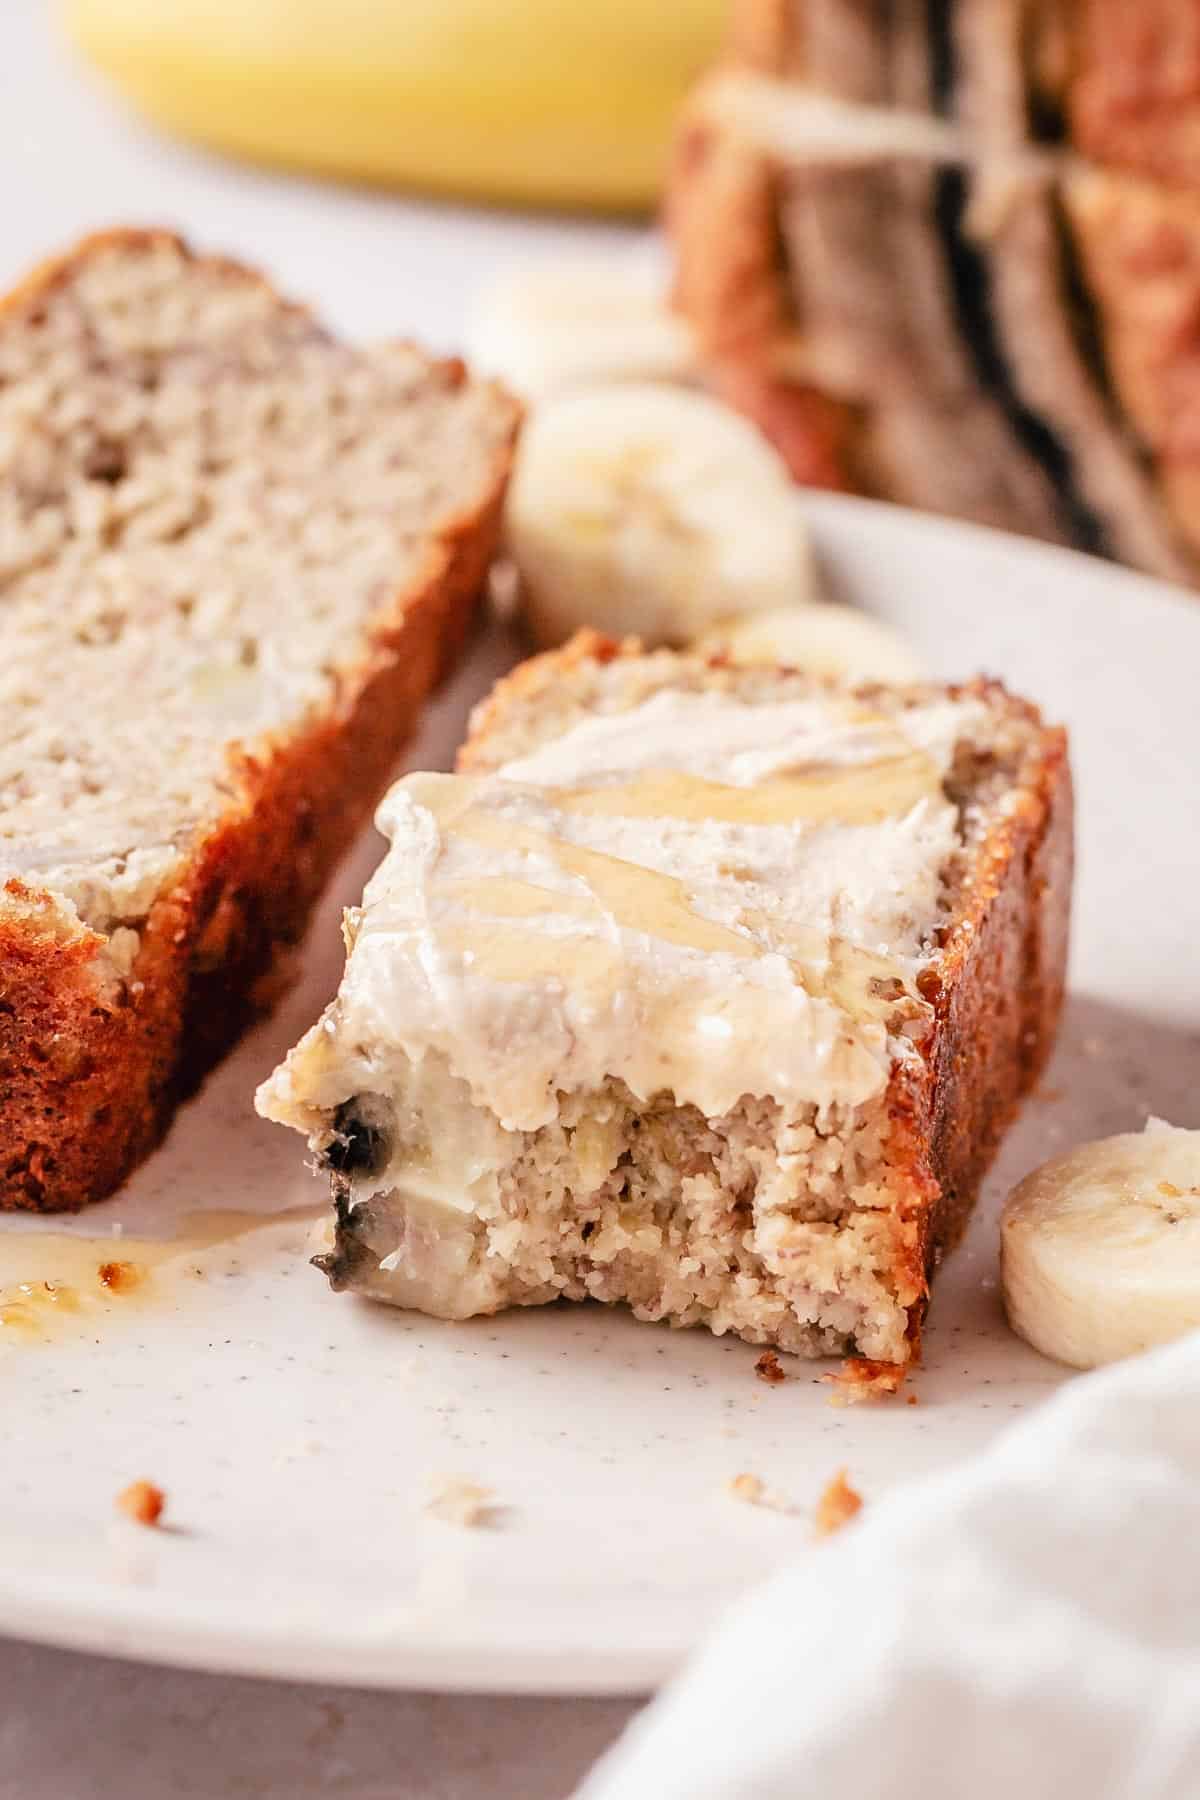 banana bread slices on a plate with almond butter and honey on top